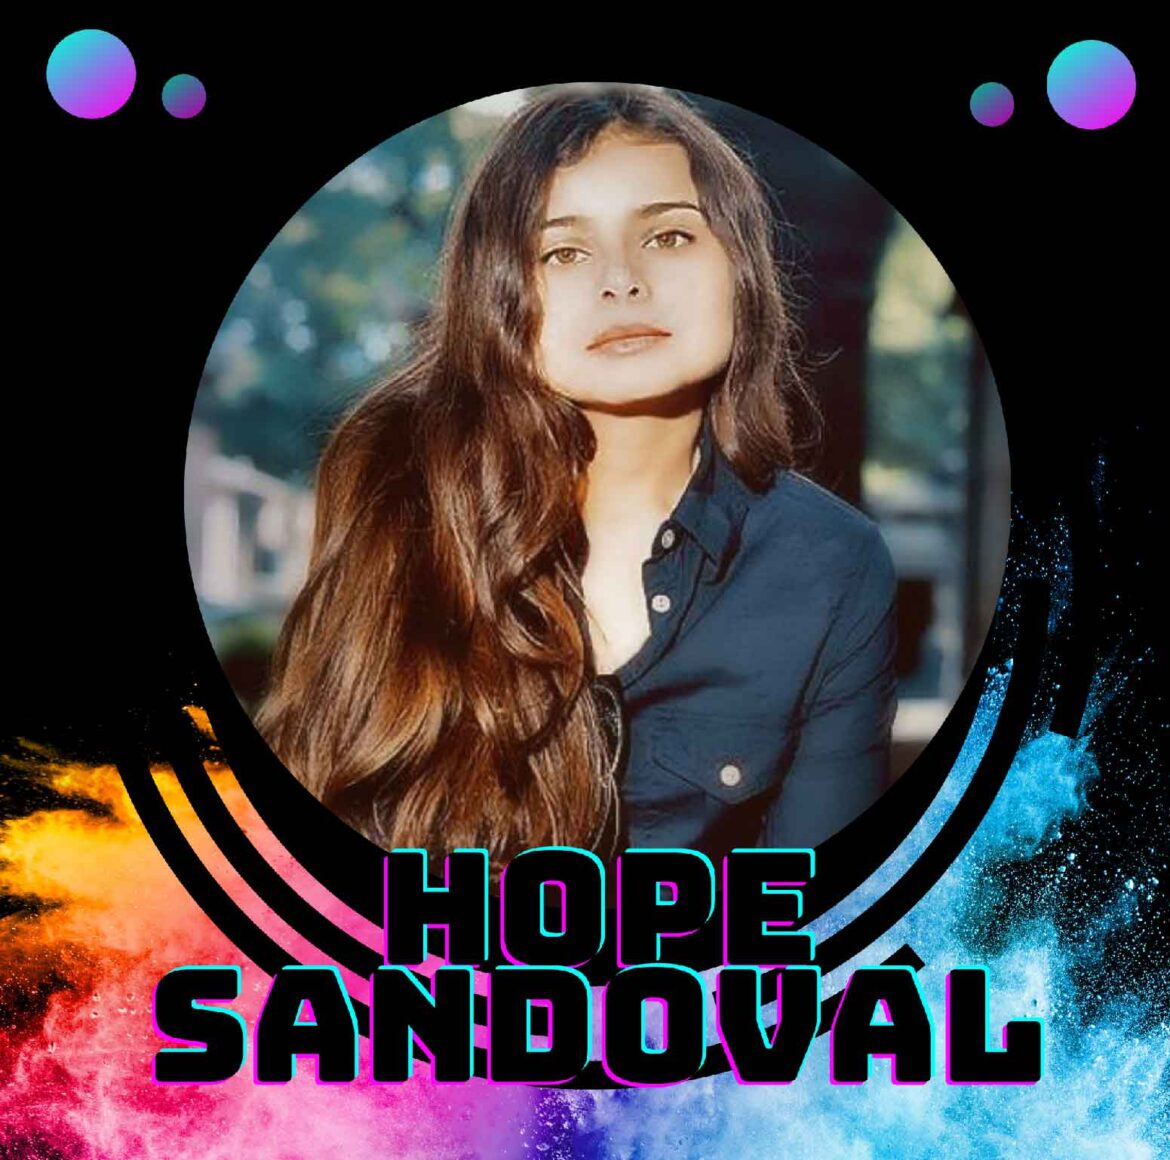 Hope Sandoval The Ethereal Voice of Dream Pop